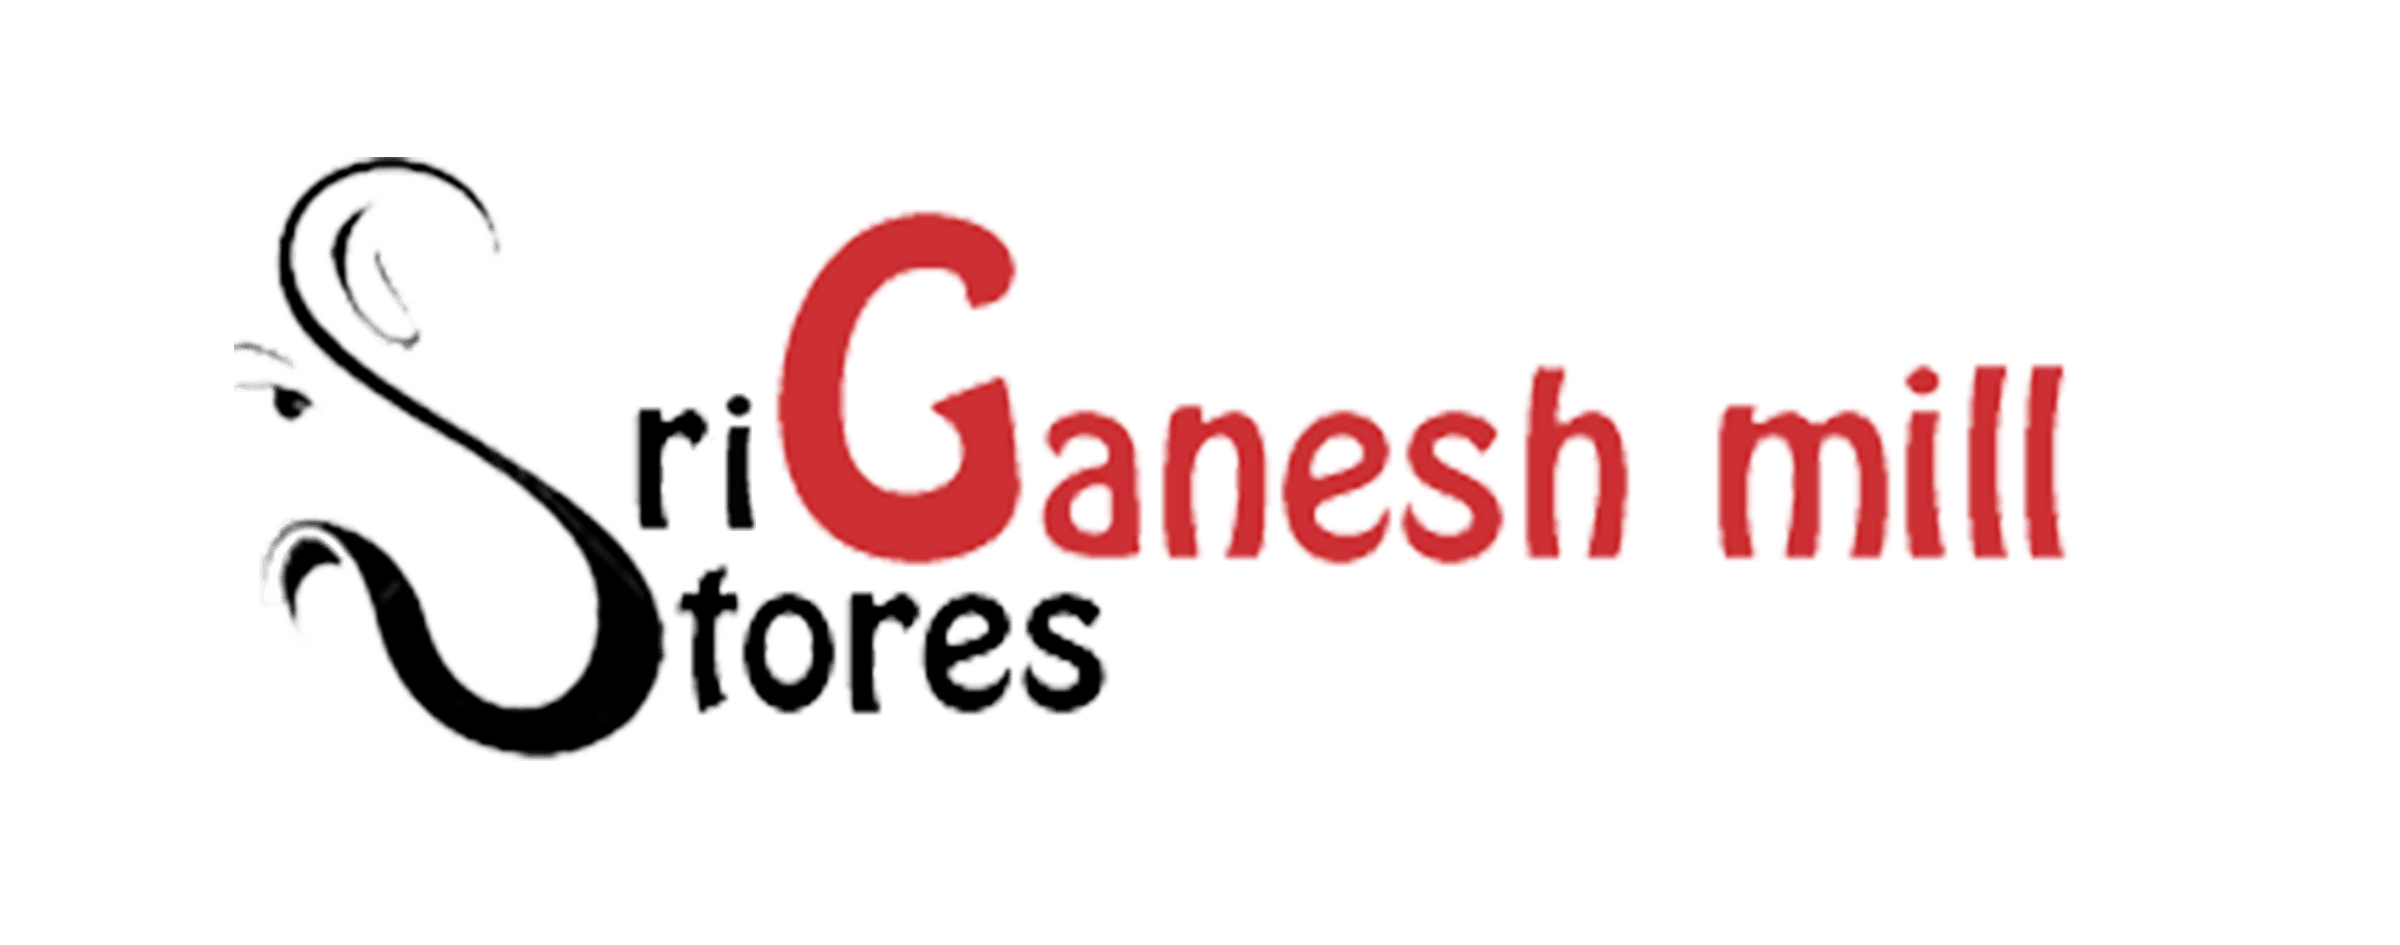 Sri Ganesh Mill Stores|Machinery manufacturers|Industrial Services